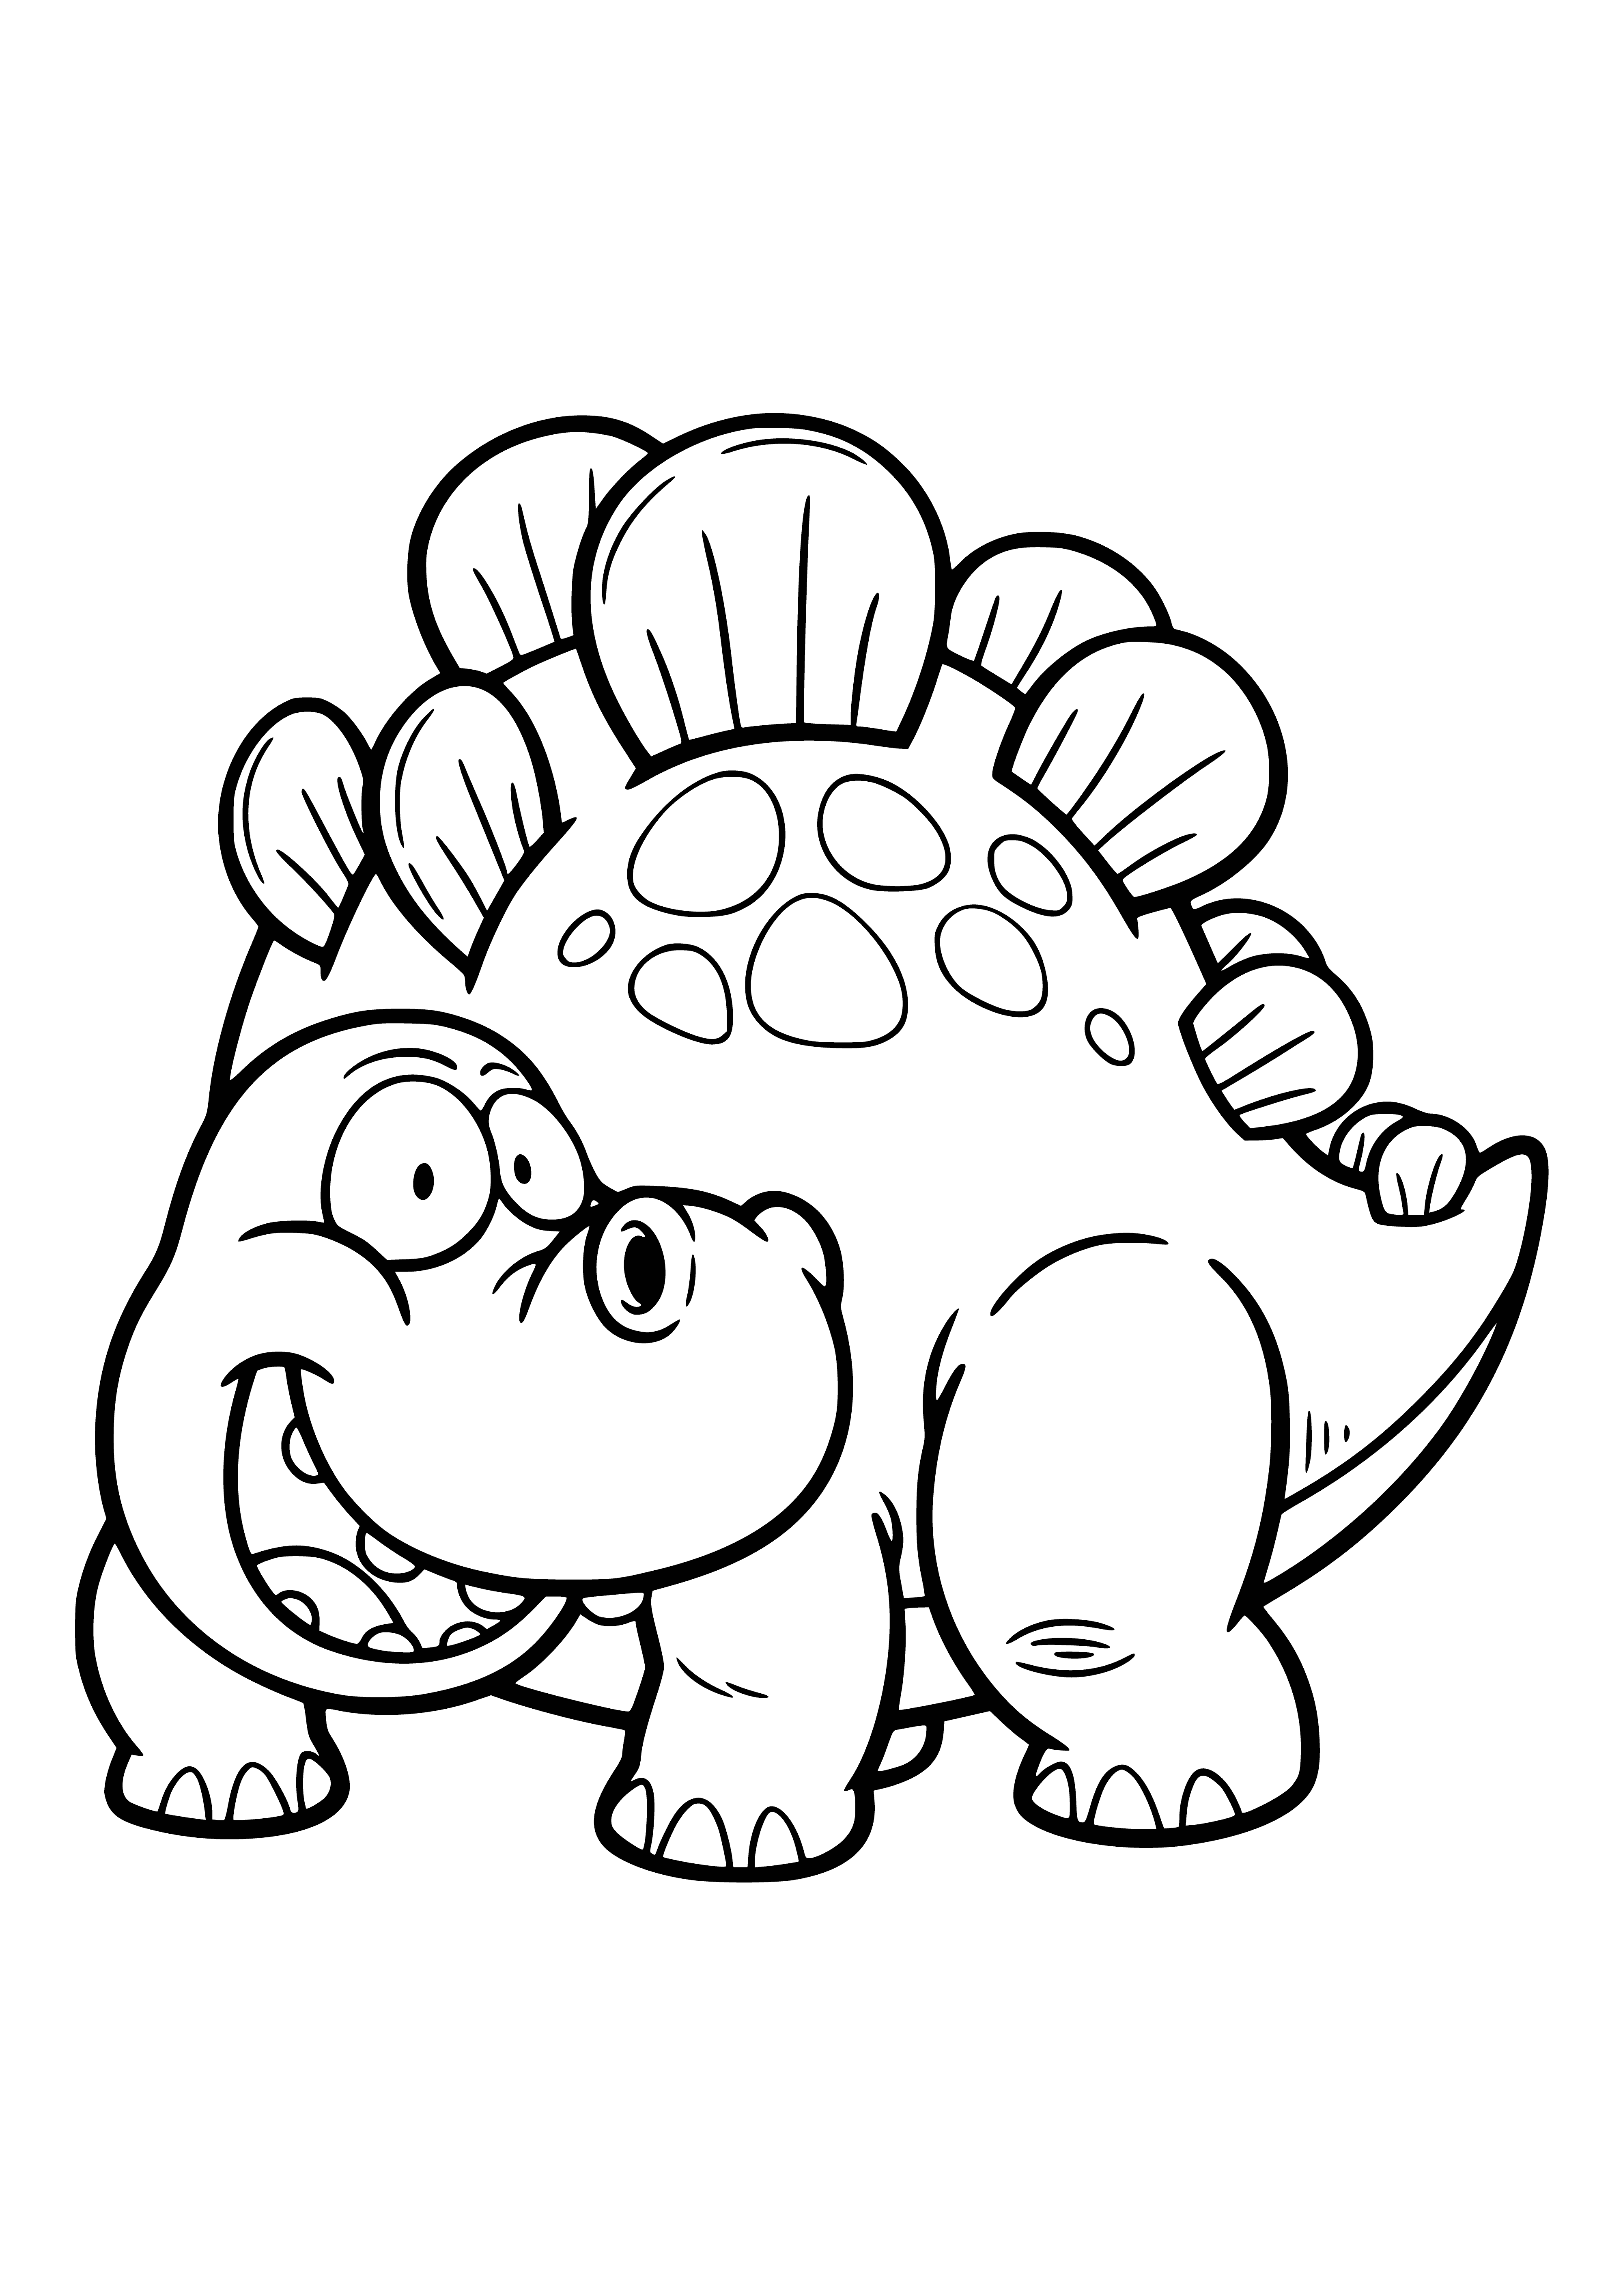 Completion coloring page